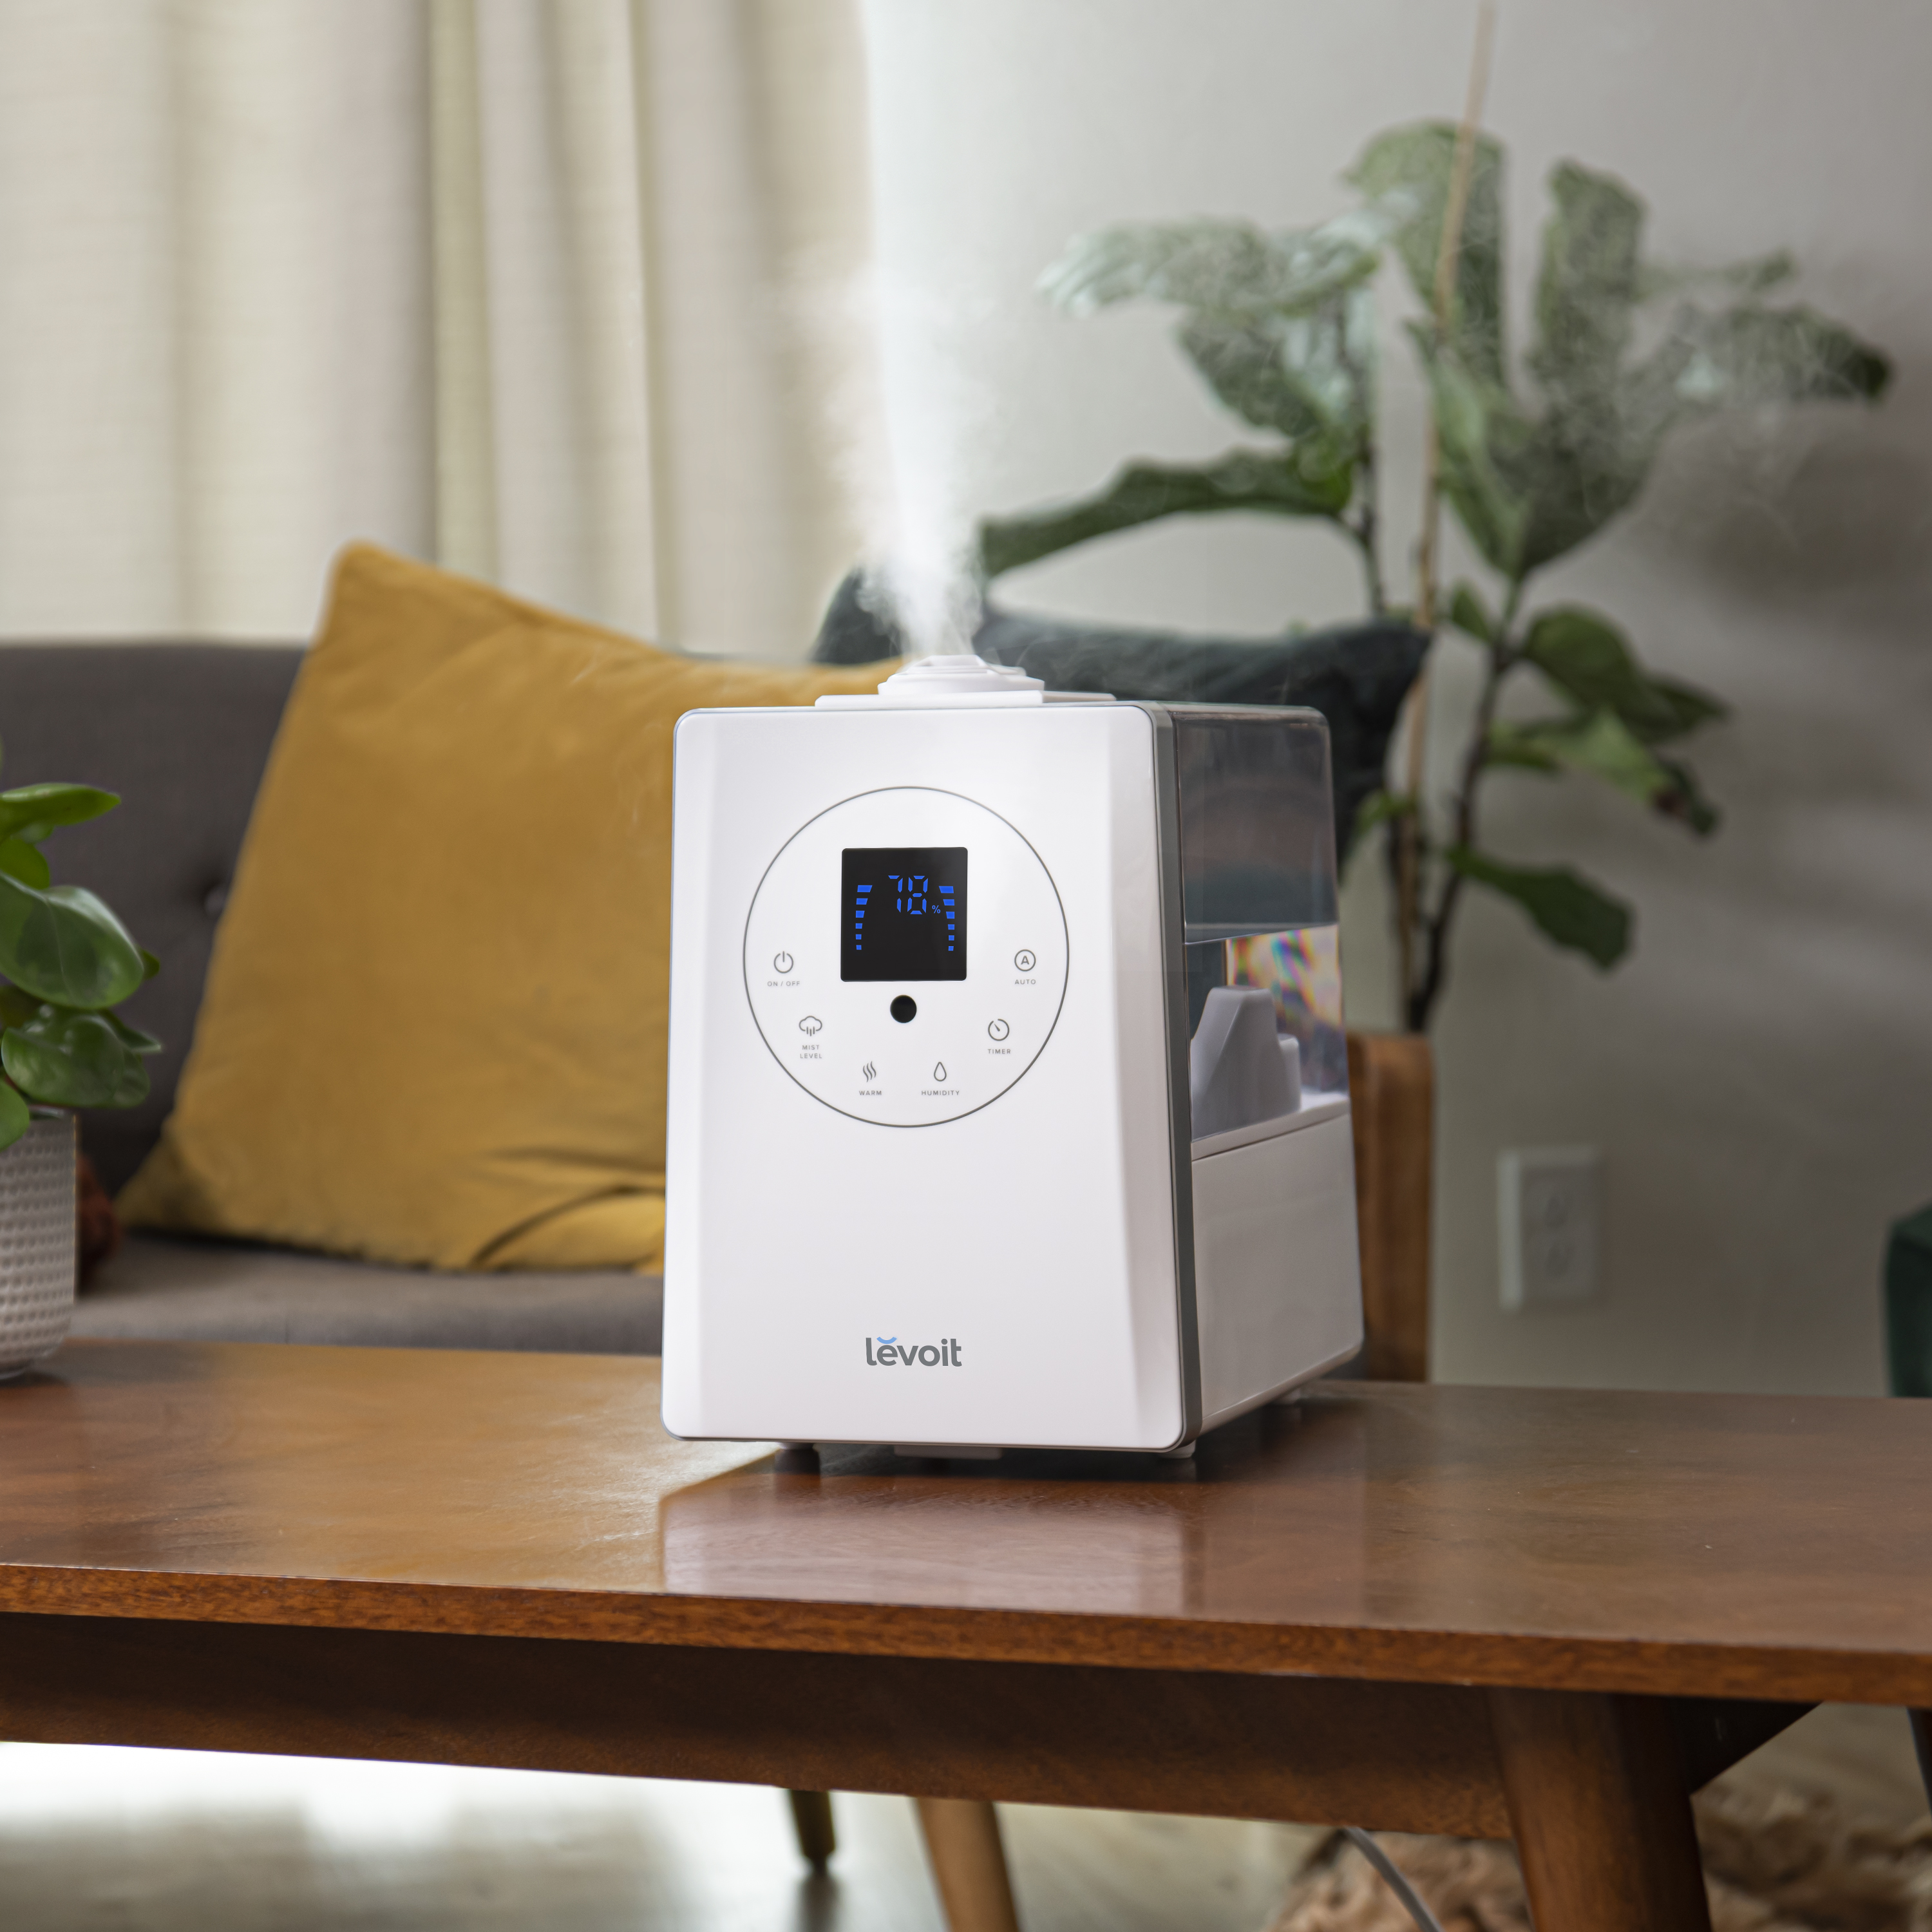 Levoit 6L 753 sq ft Warm and Cool Mist Humidifier, Vaporizer, White - image 11 of 13